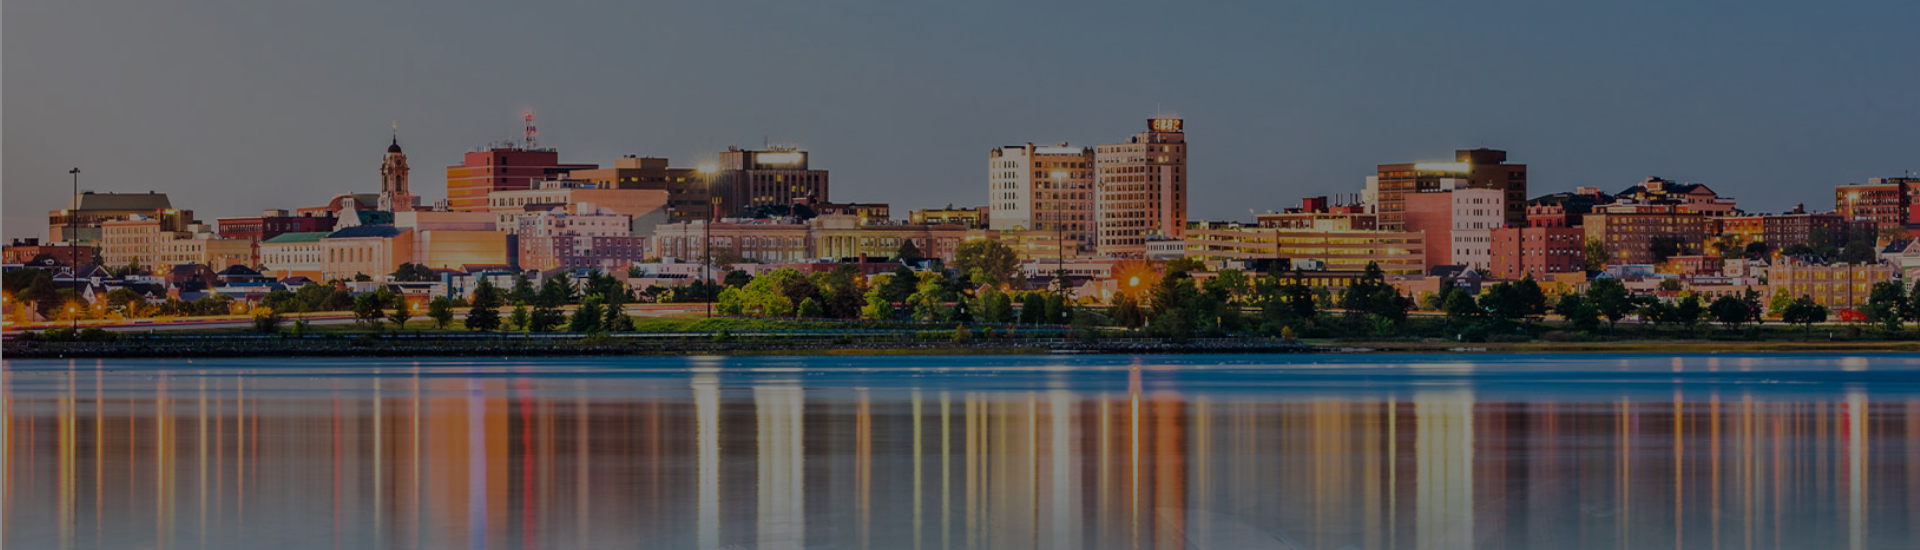 Cross Country Healthcare color photo of the Portland, Maine cityscape.        